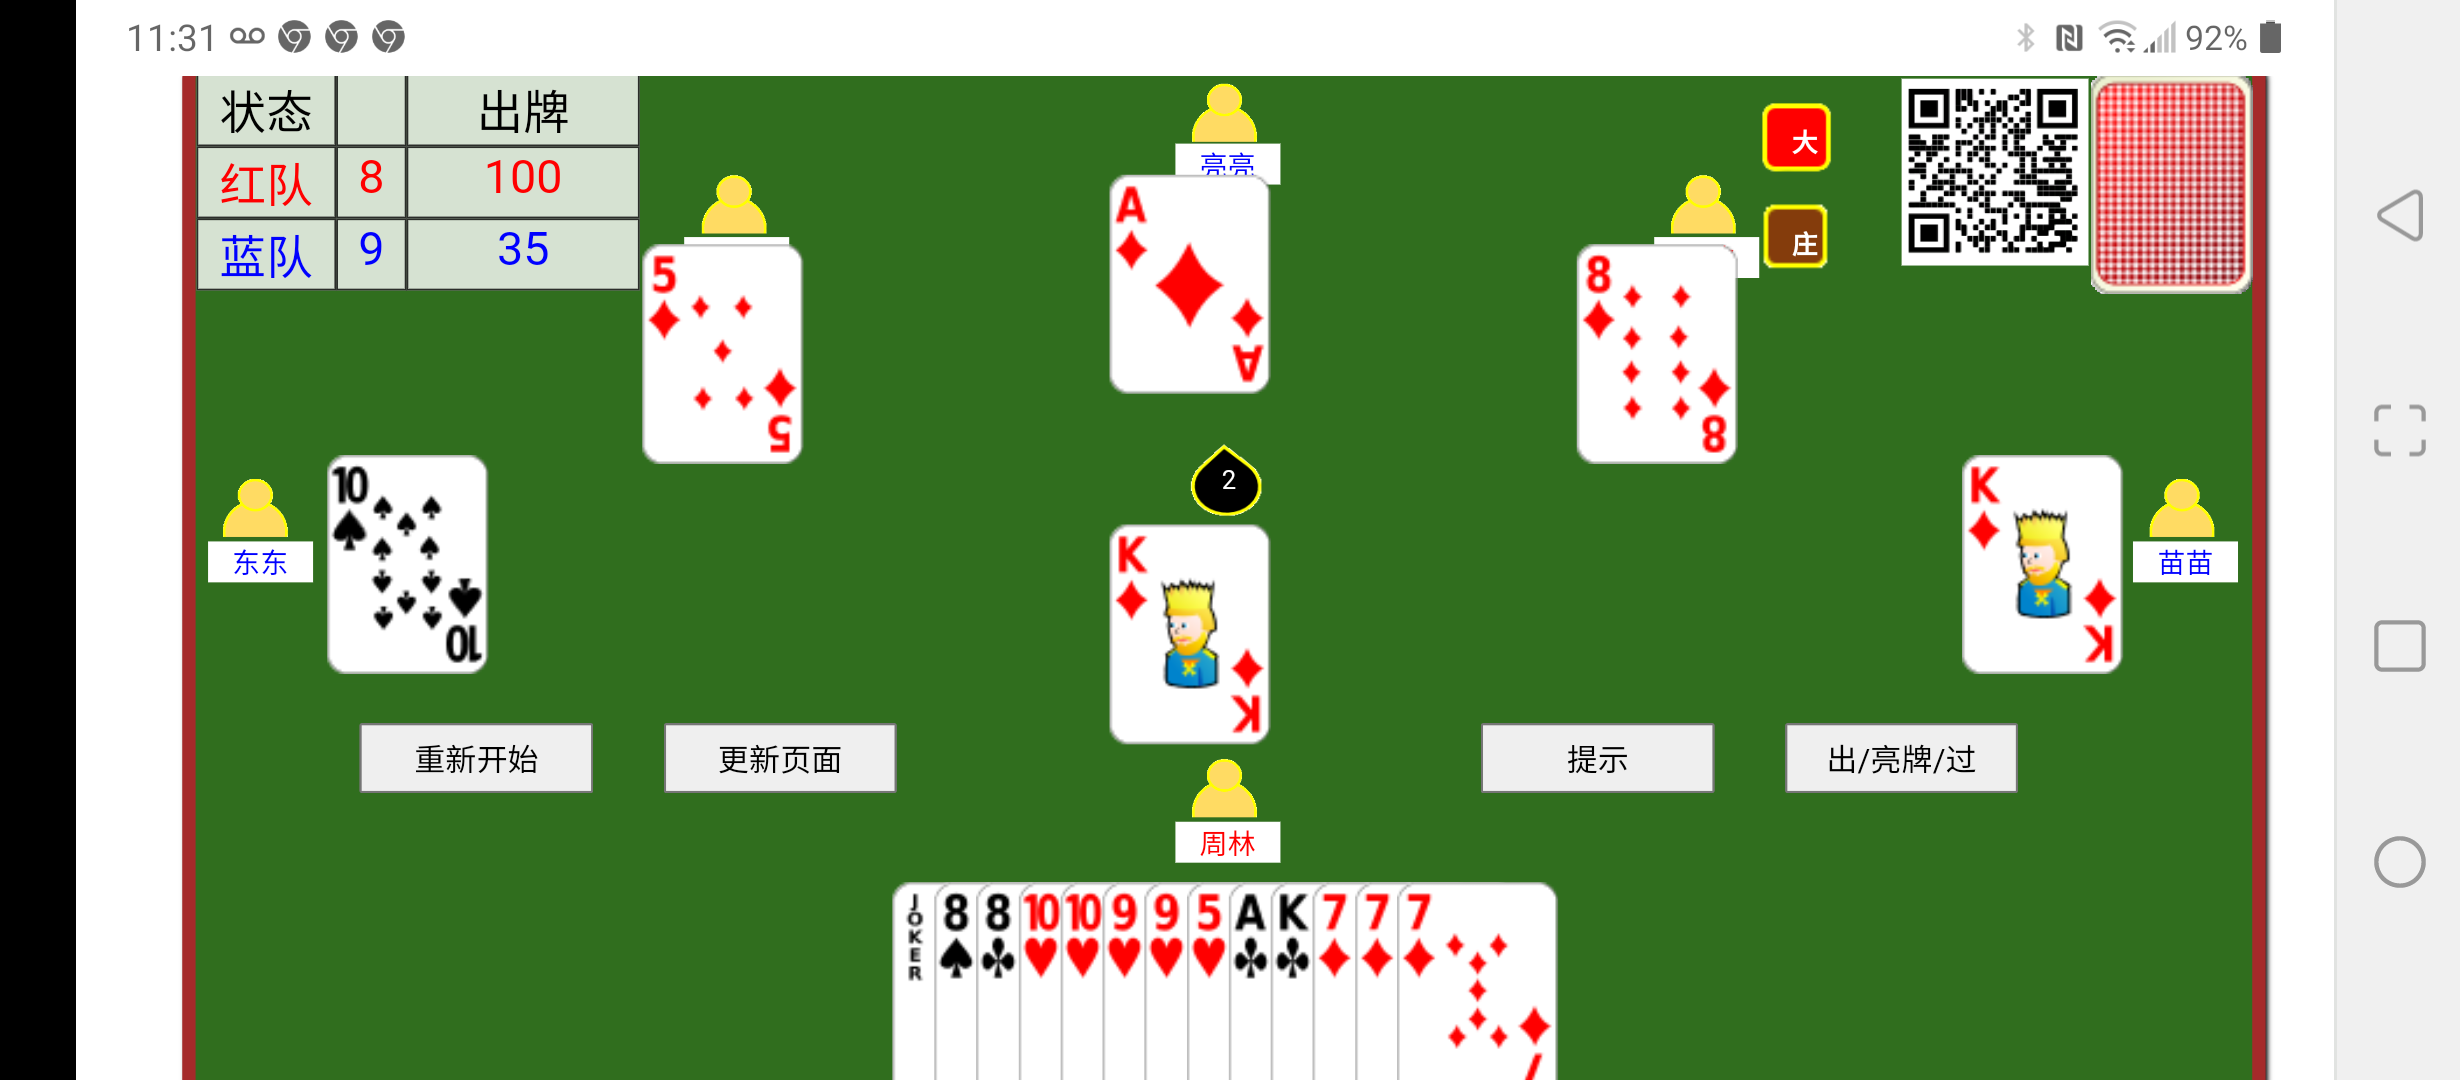 html5 tractor card game Screenshot_20220122-113109.png